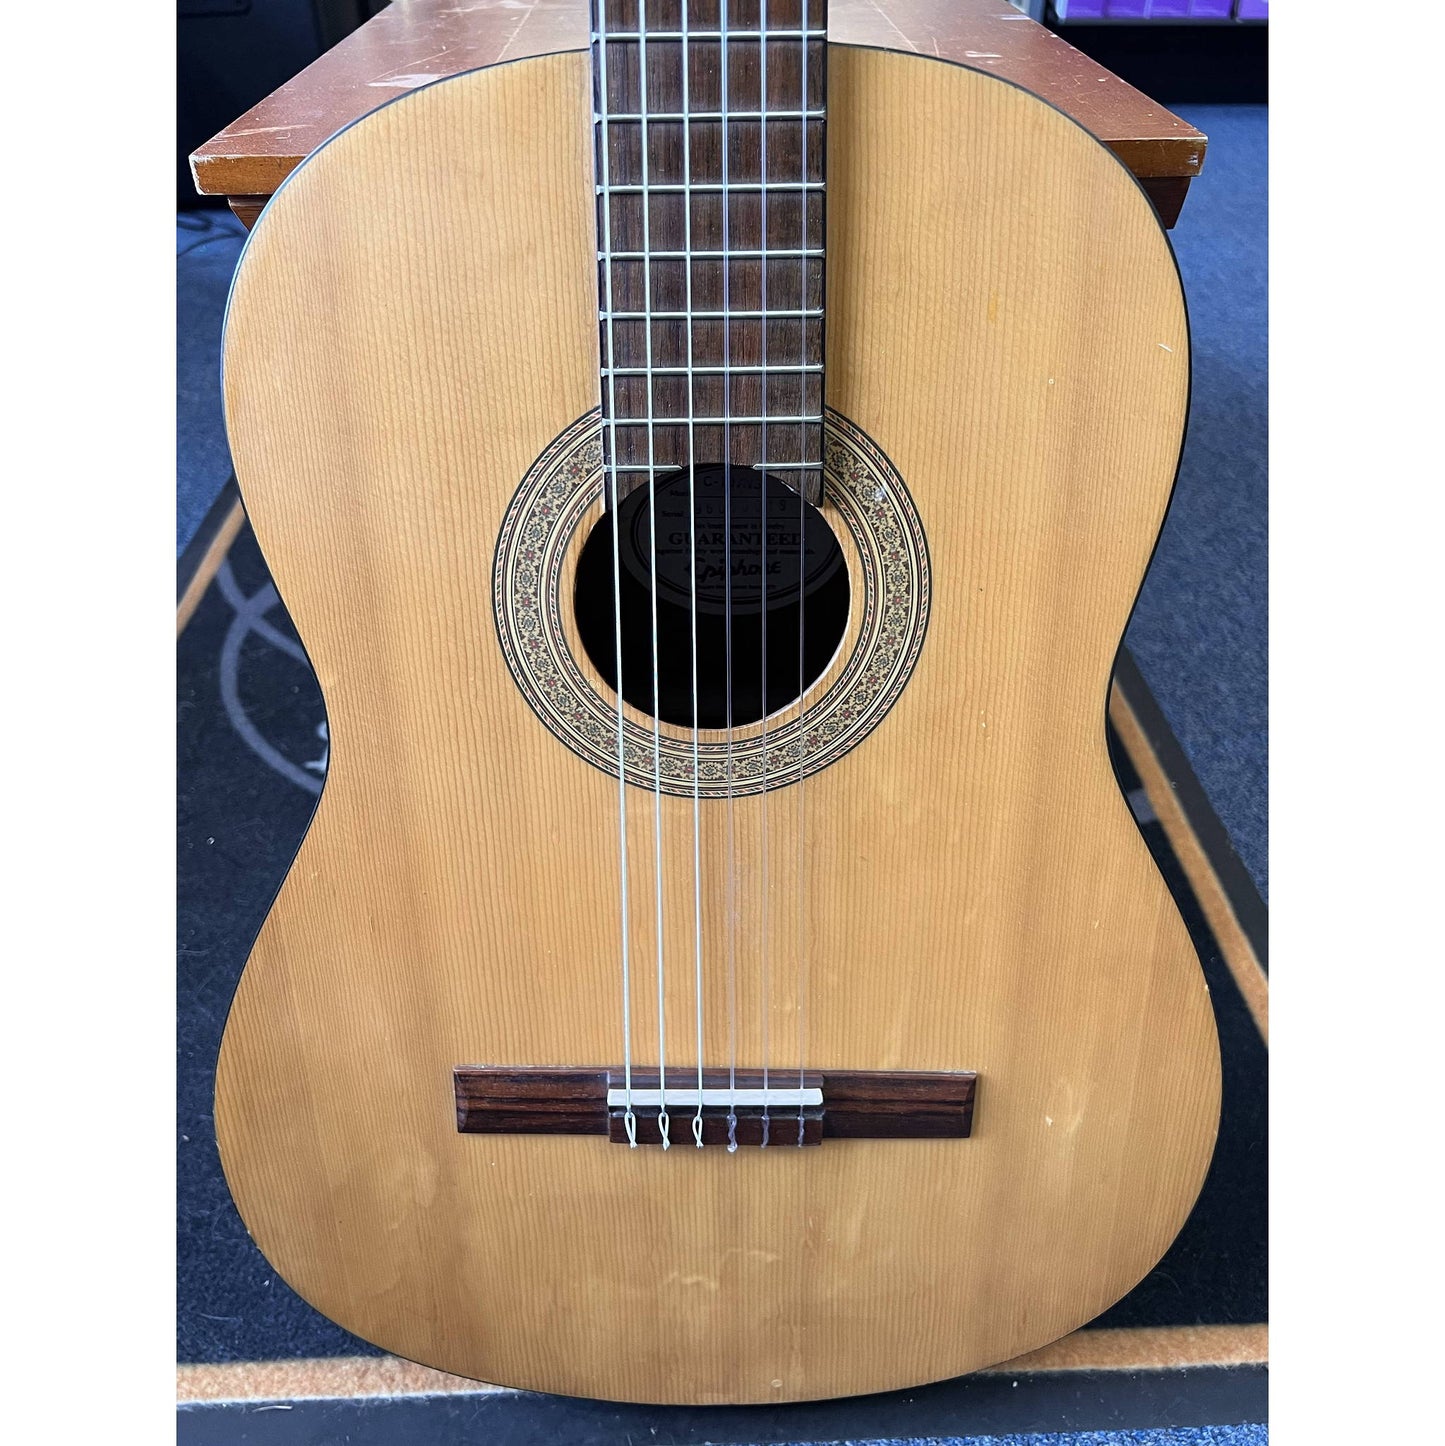 Epiphone C-10 / NS Classical Guitar (used)